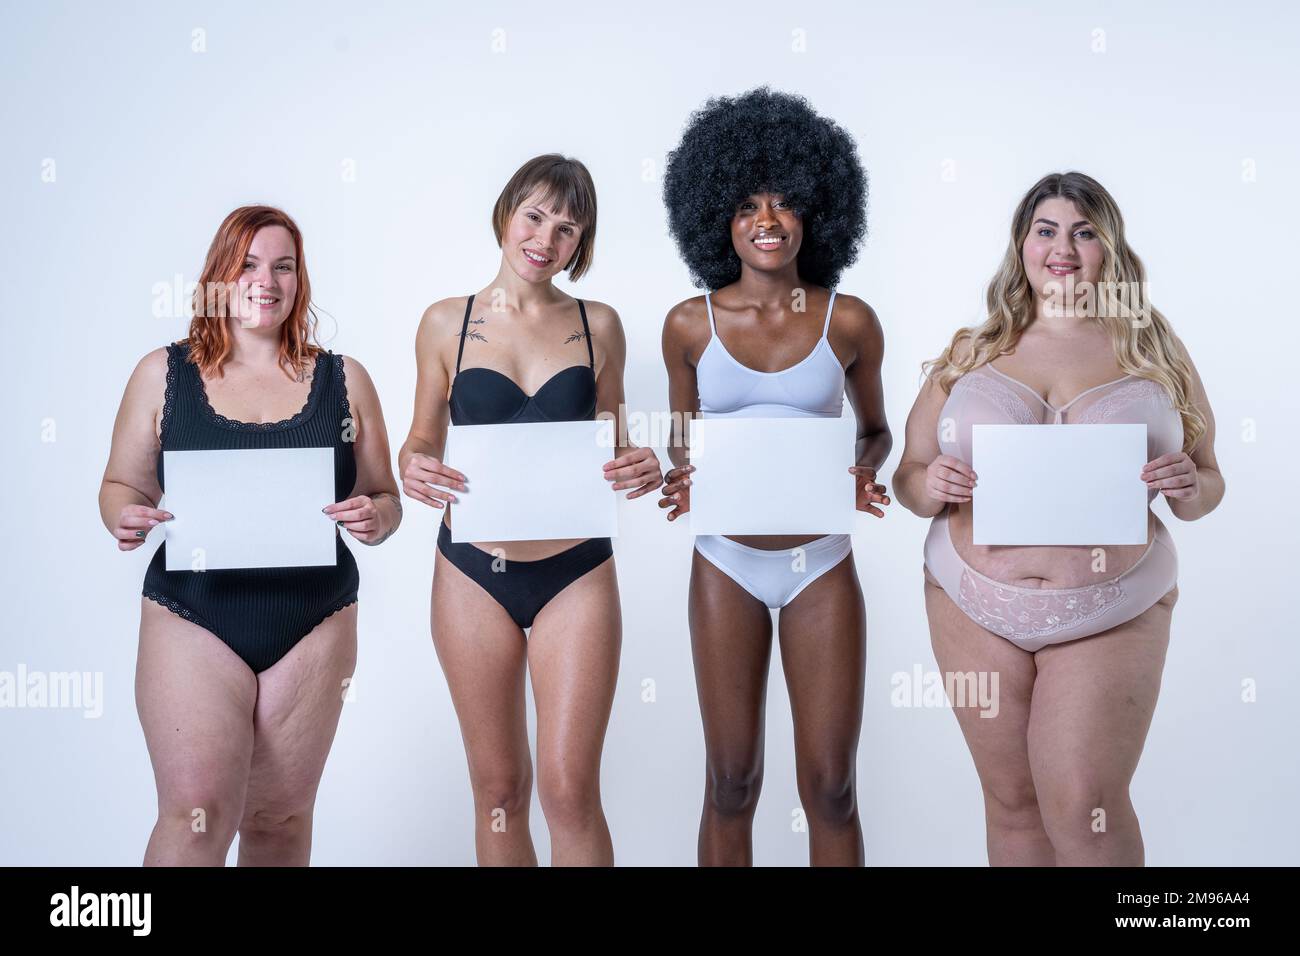 Multiracial group of women holding blank white board over belly, body positive concept, copy space on empty signs to write what you want Stock Photo